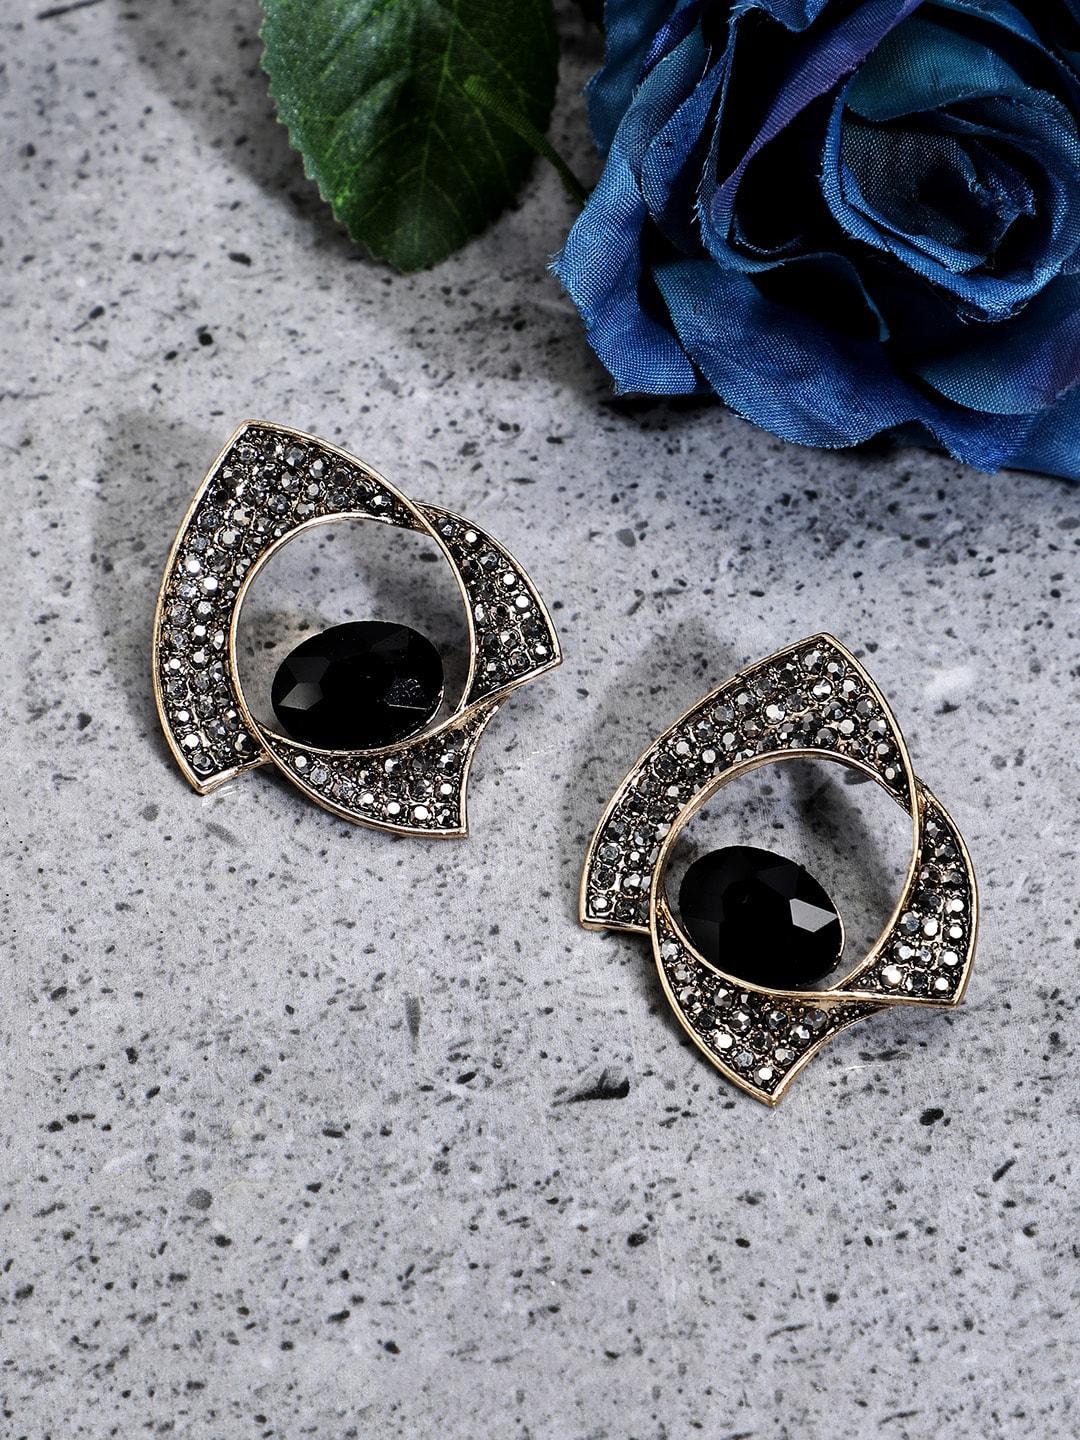 SOHI Gold-Plated Artificial Stones Contemporary Studs Earrings